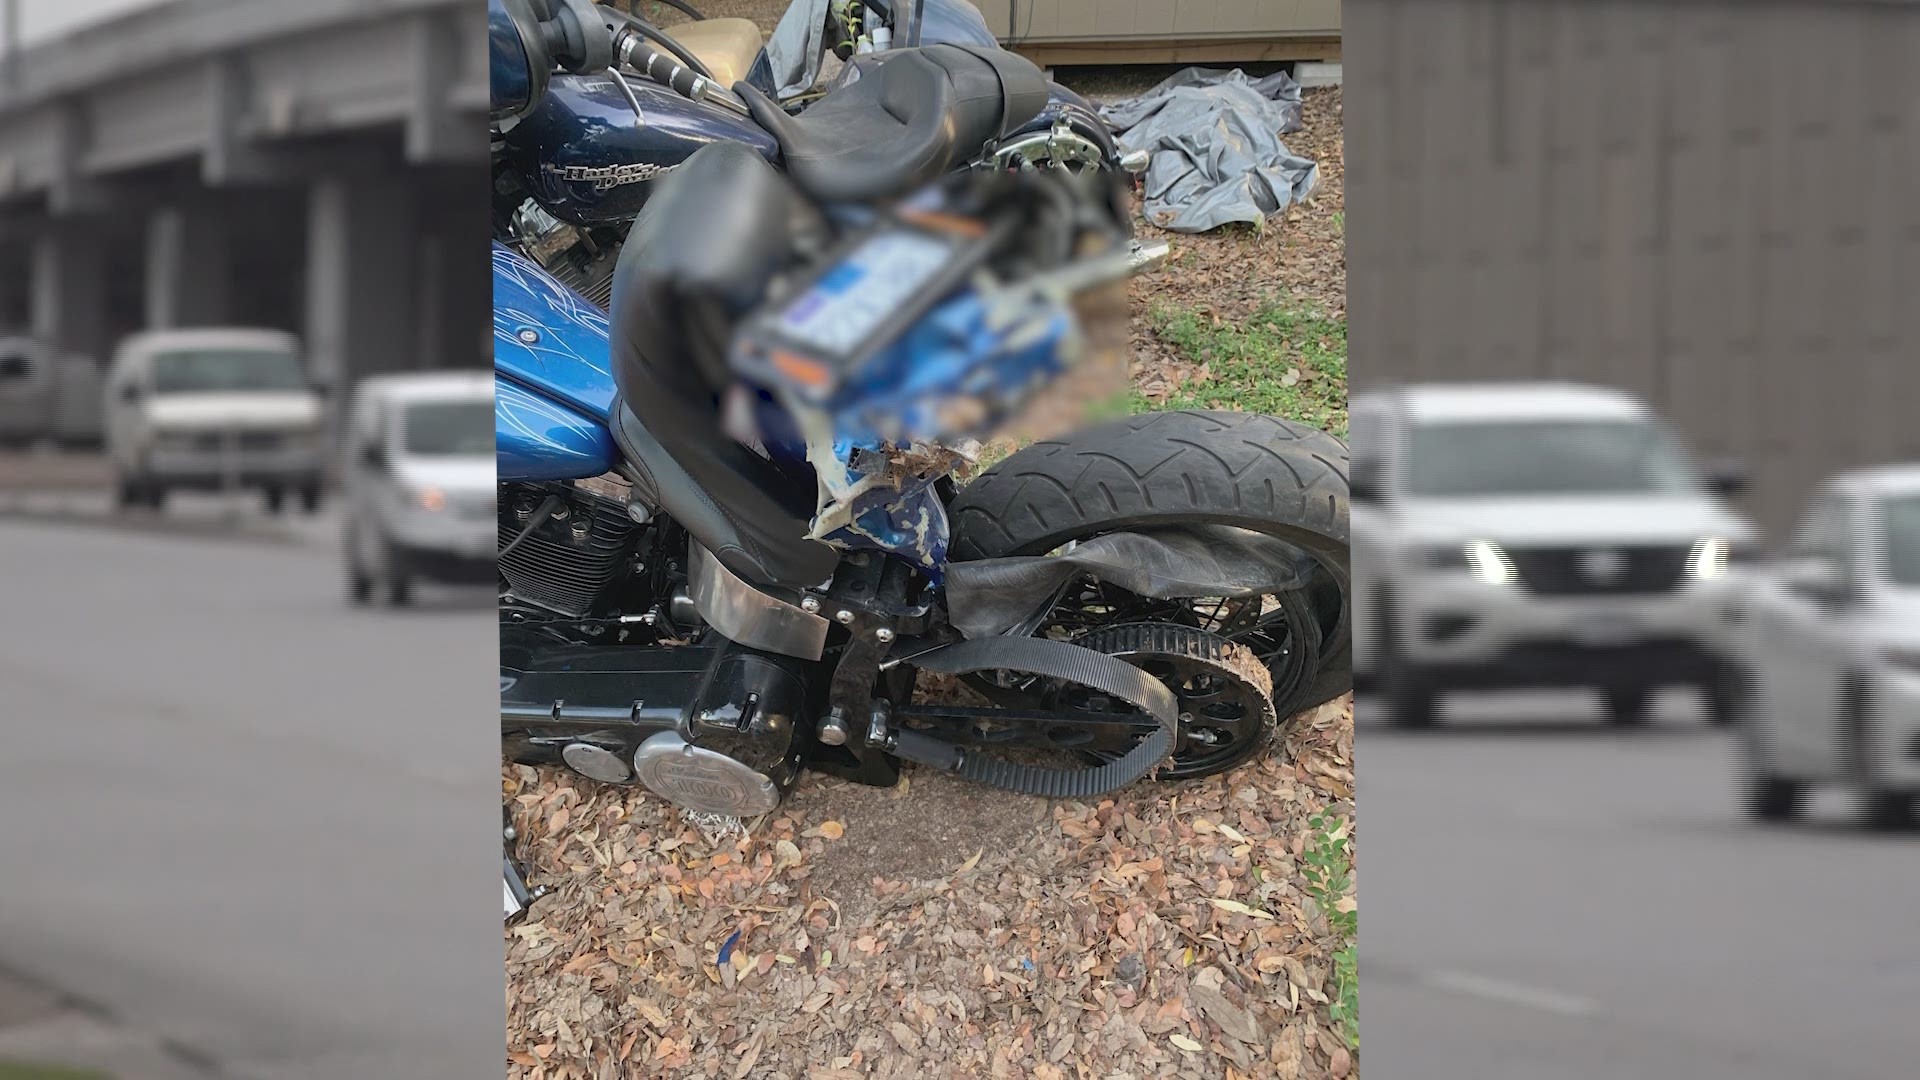 An Austin motorcyclist is recovering after a serious wreck that happened on MoPac.